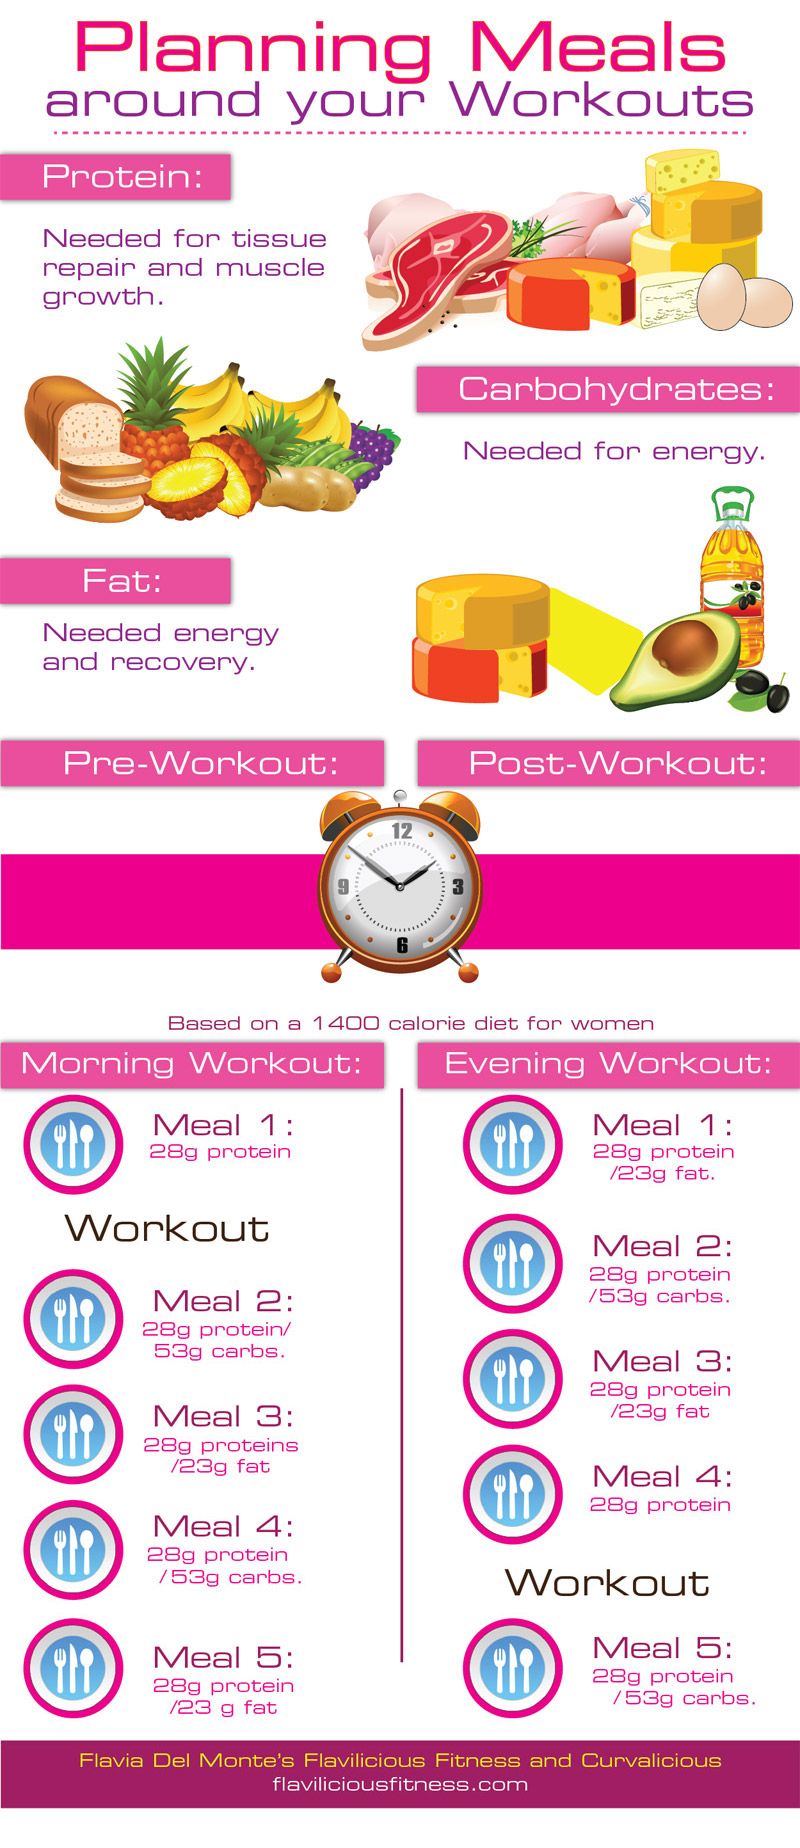 Planning Meals Around Your Workouts